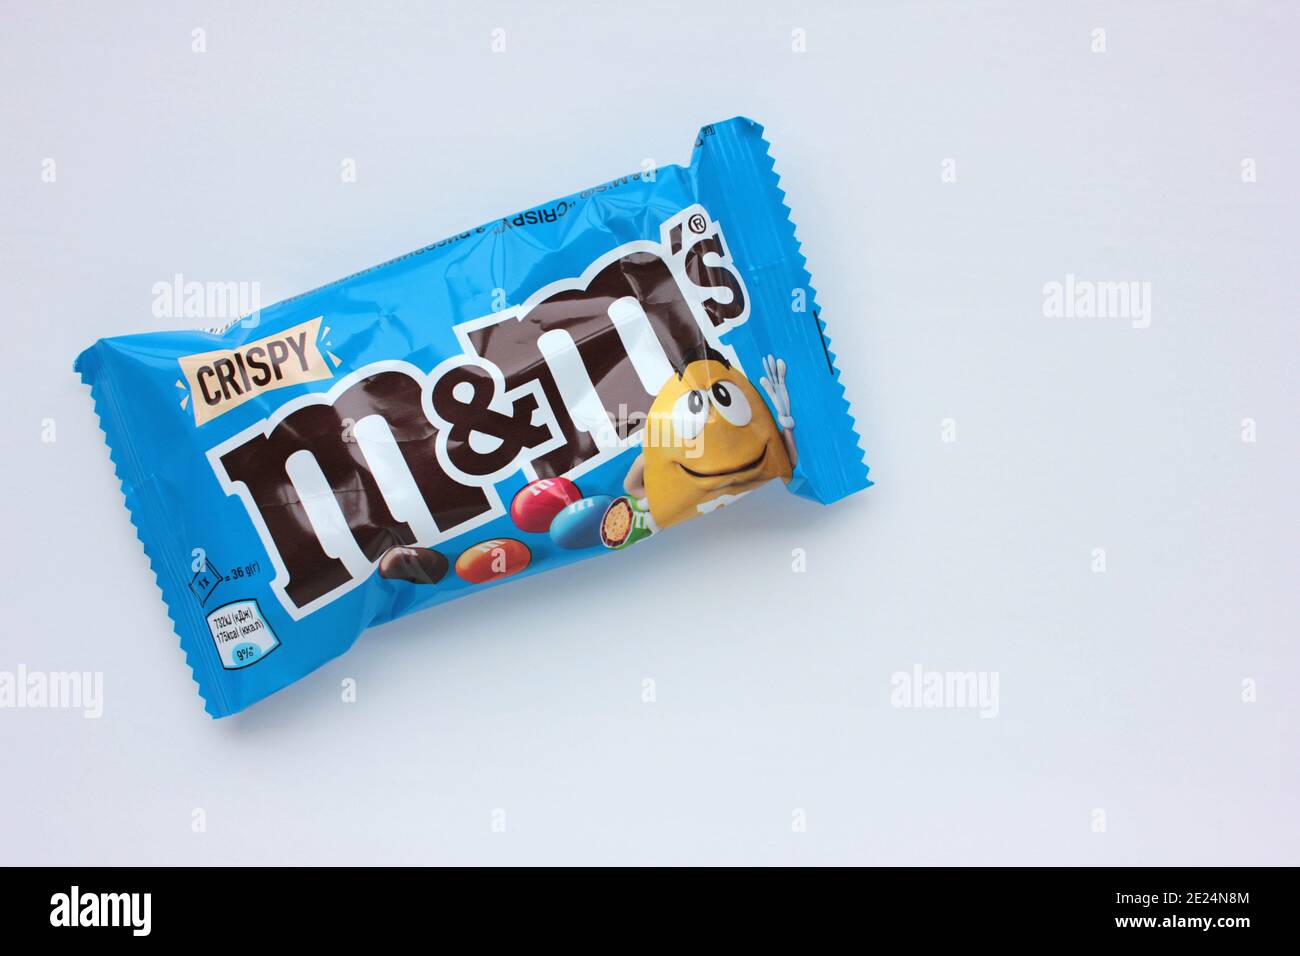 Mars Wrigley Confectionery rolls-out Crunchy Caramel M&M's